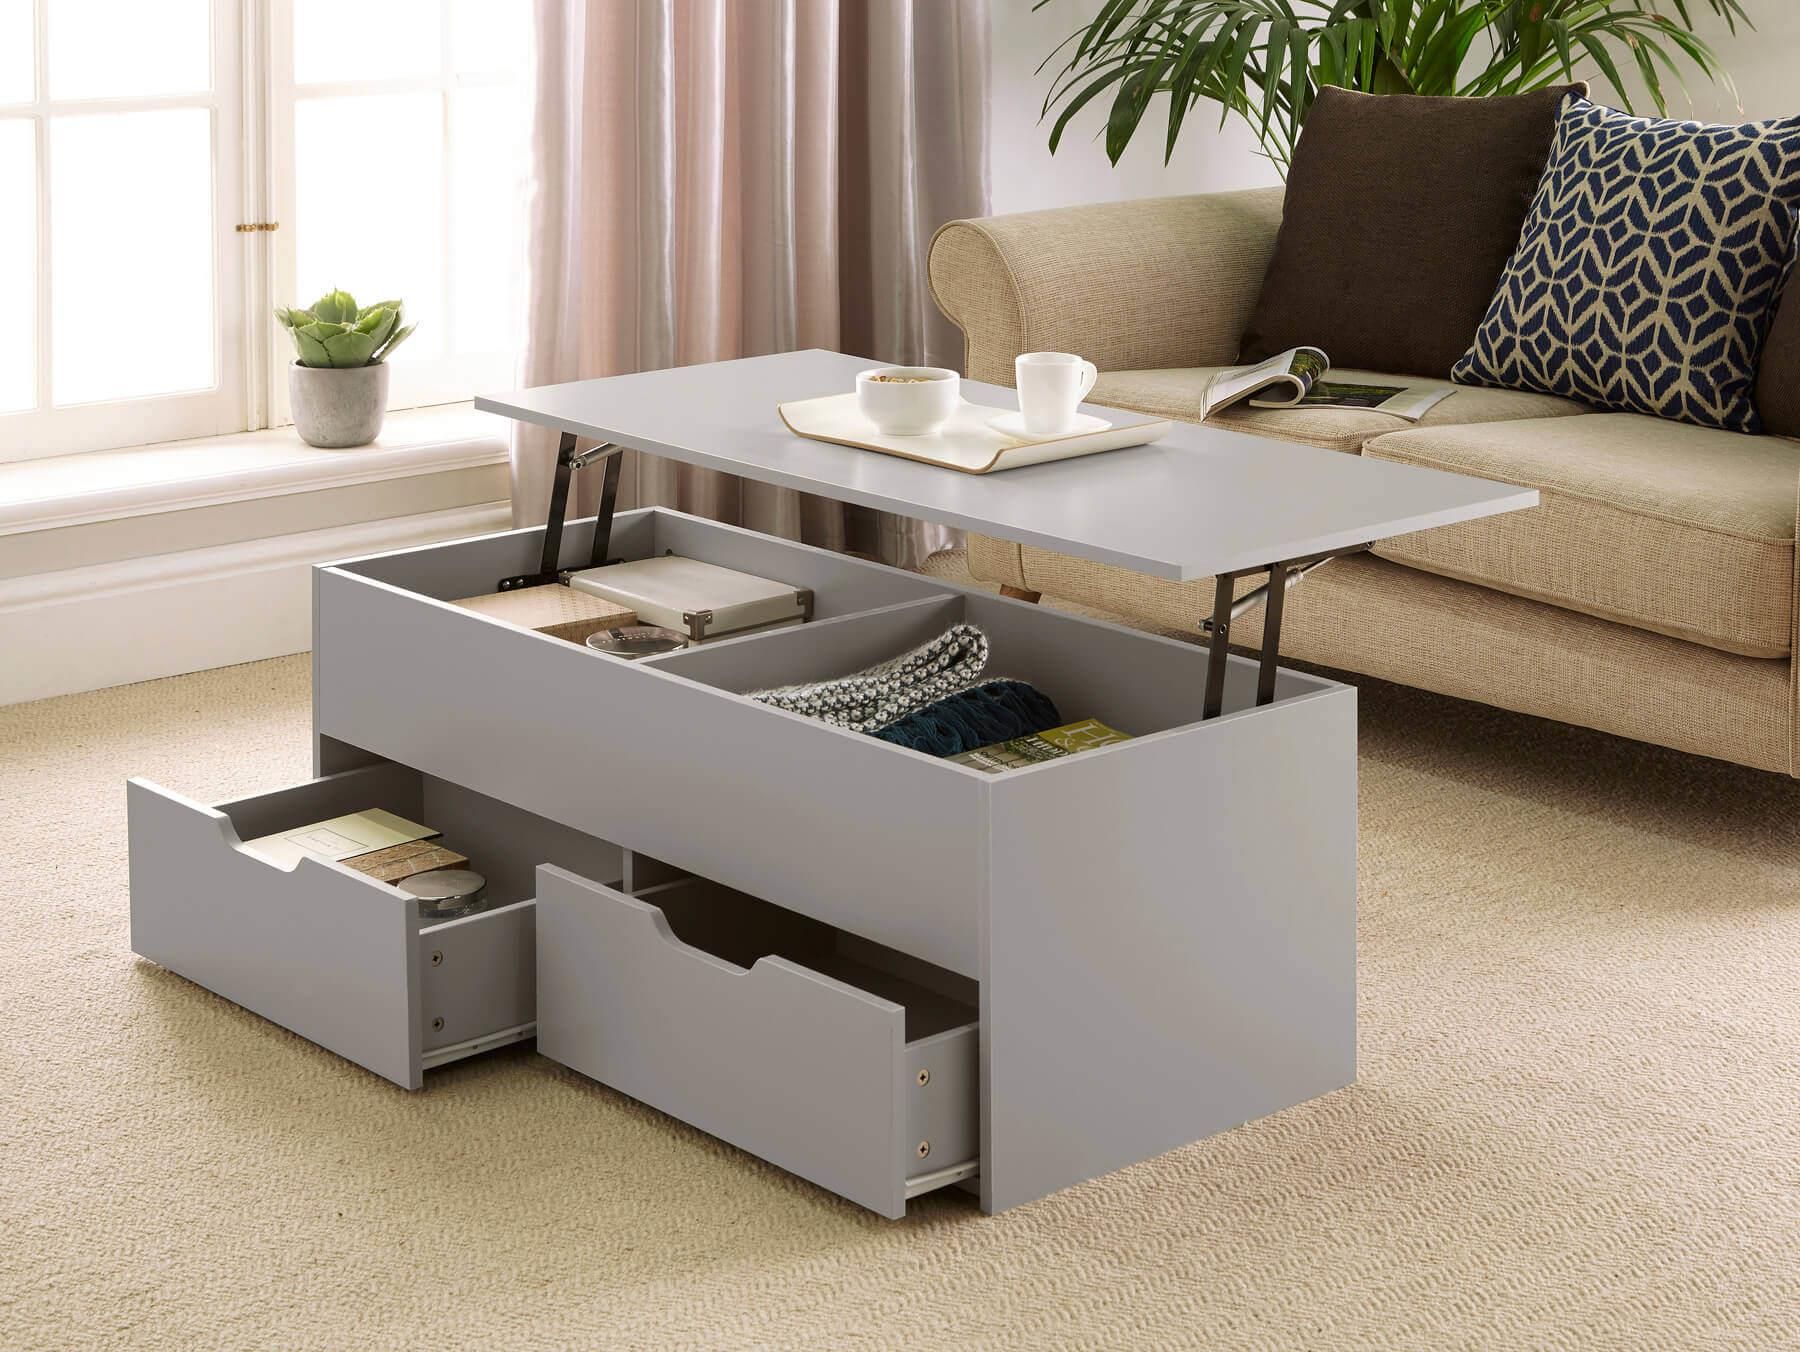 Grey Wooden Coffee Table With Lift Up Top And 2 Large Pertaining To Smoke Gray Wood Coffee Tables (View 6 of 15)